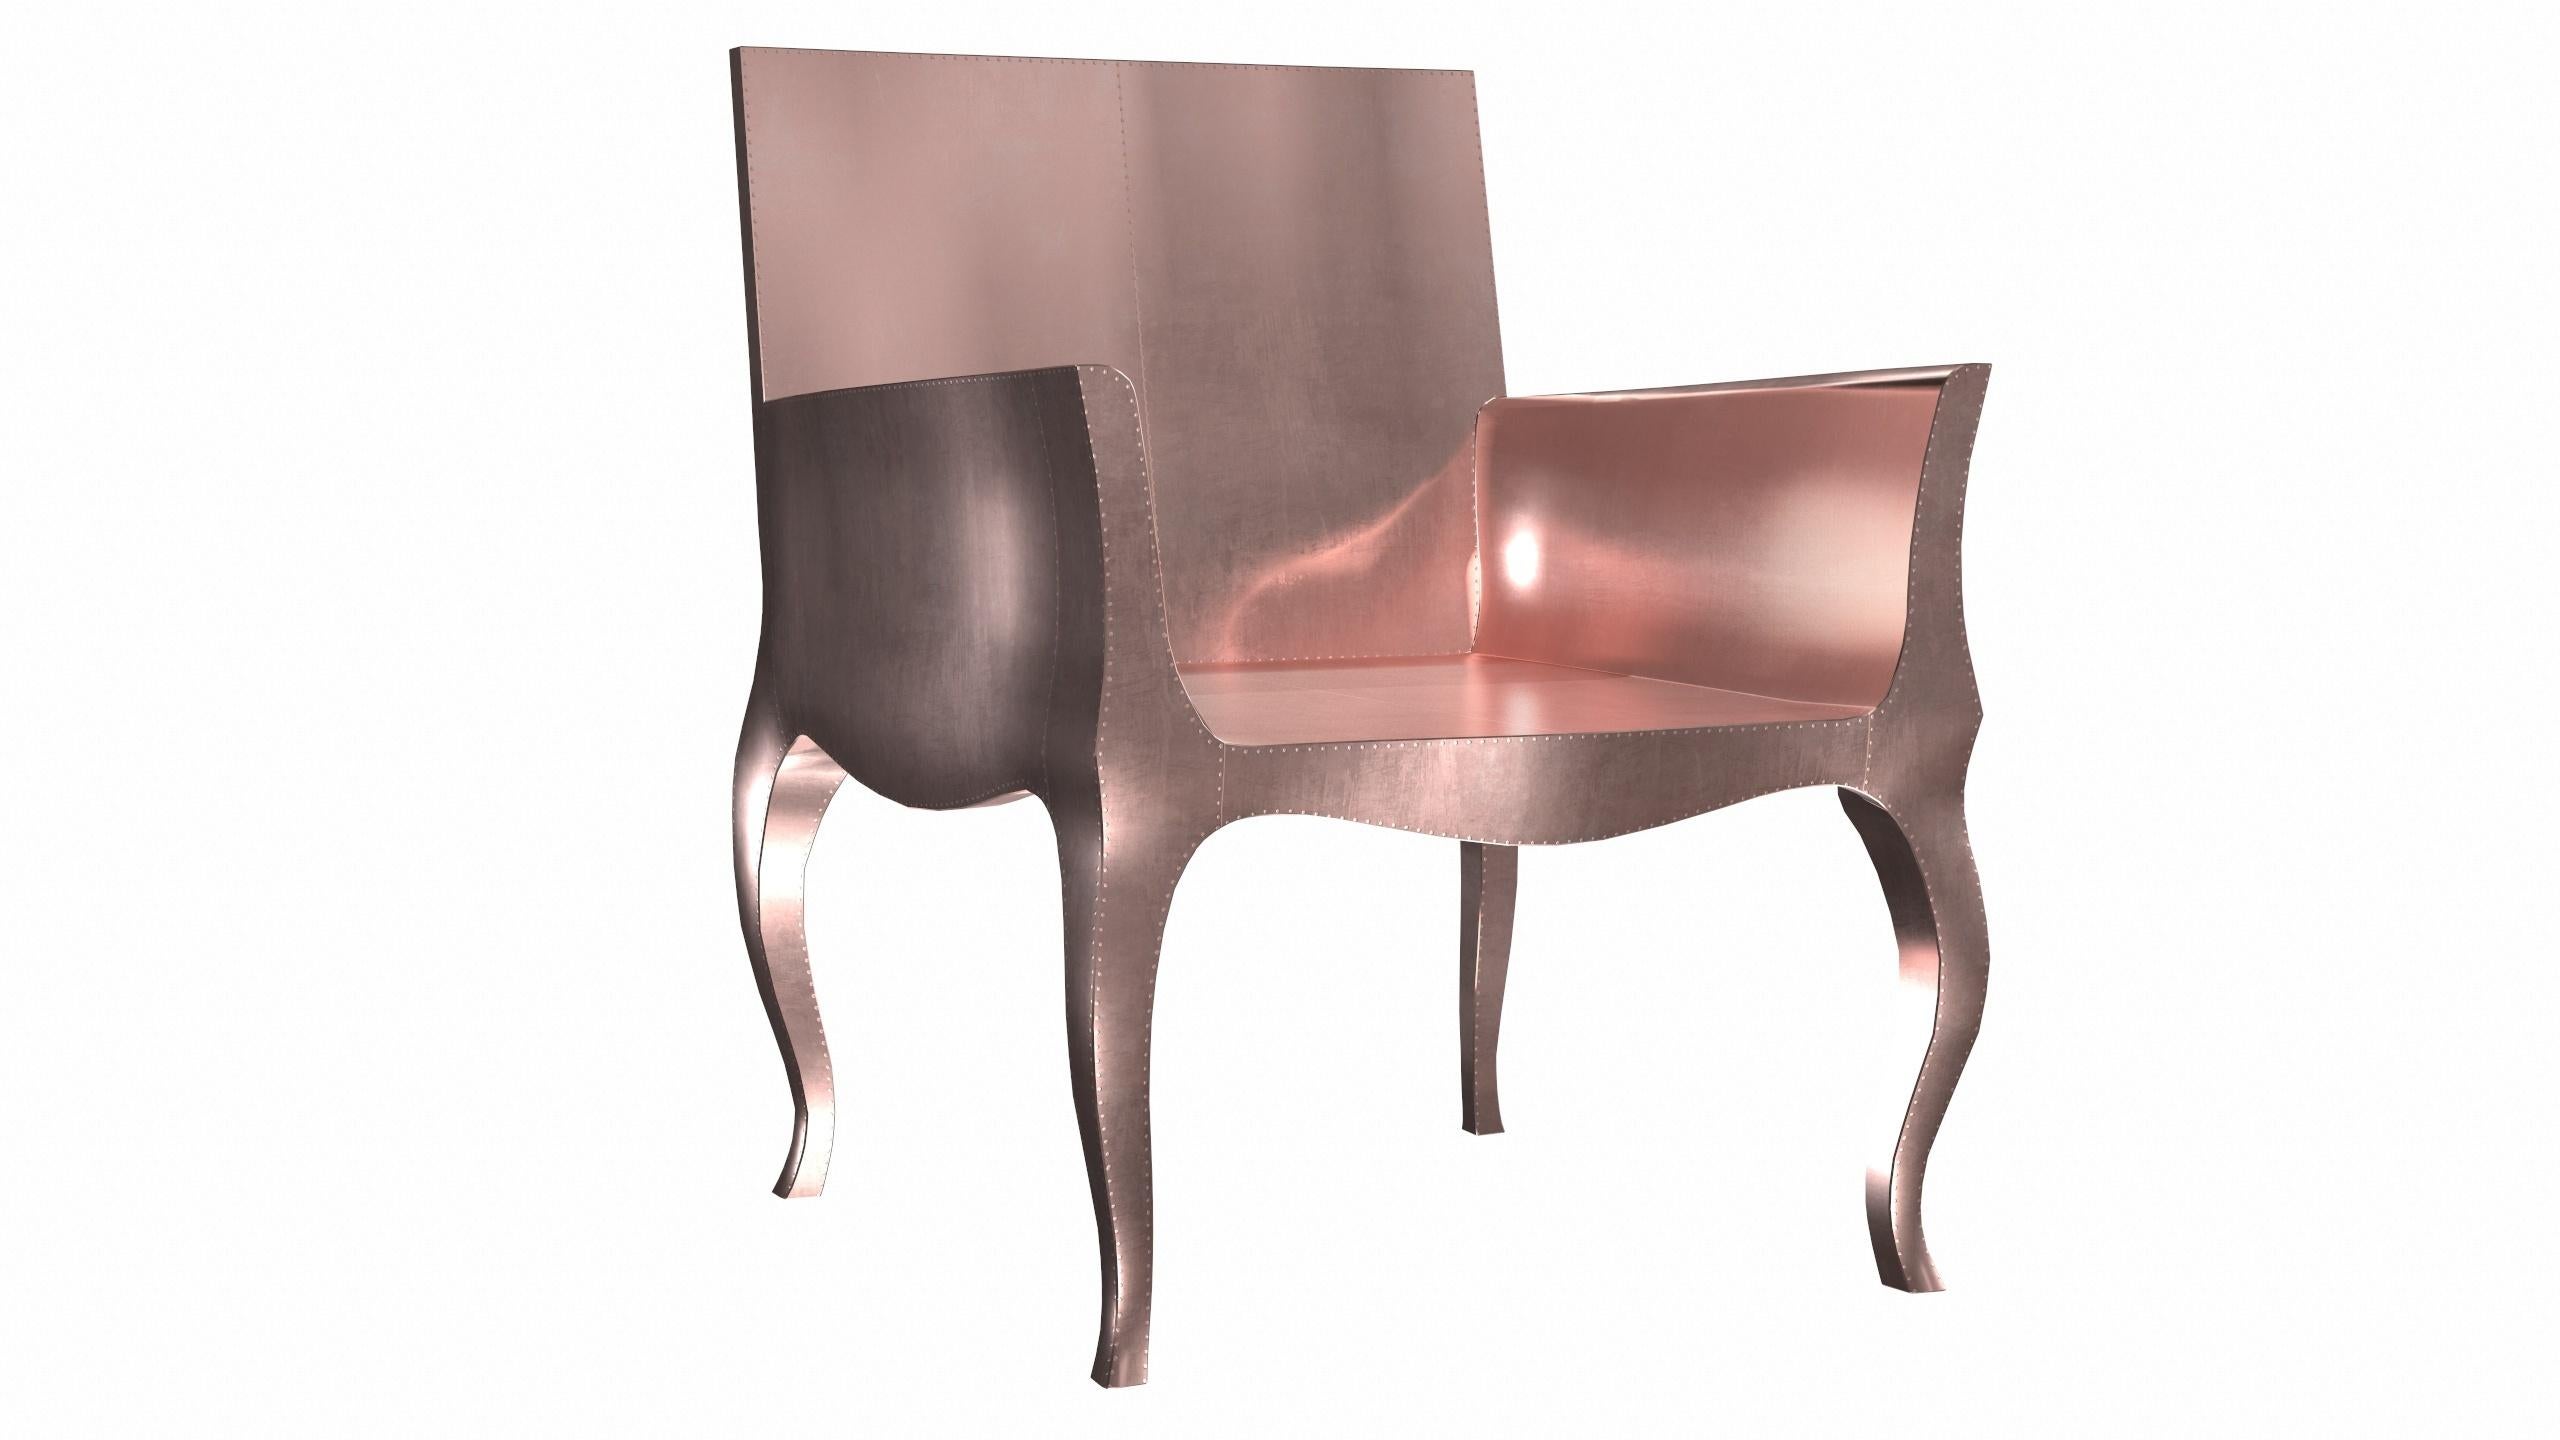 Art Deco Desk Chair in Smooth Copper by Paul Mathieu for S. Odegard In New Condition For Sale In New York, NY